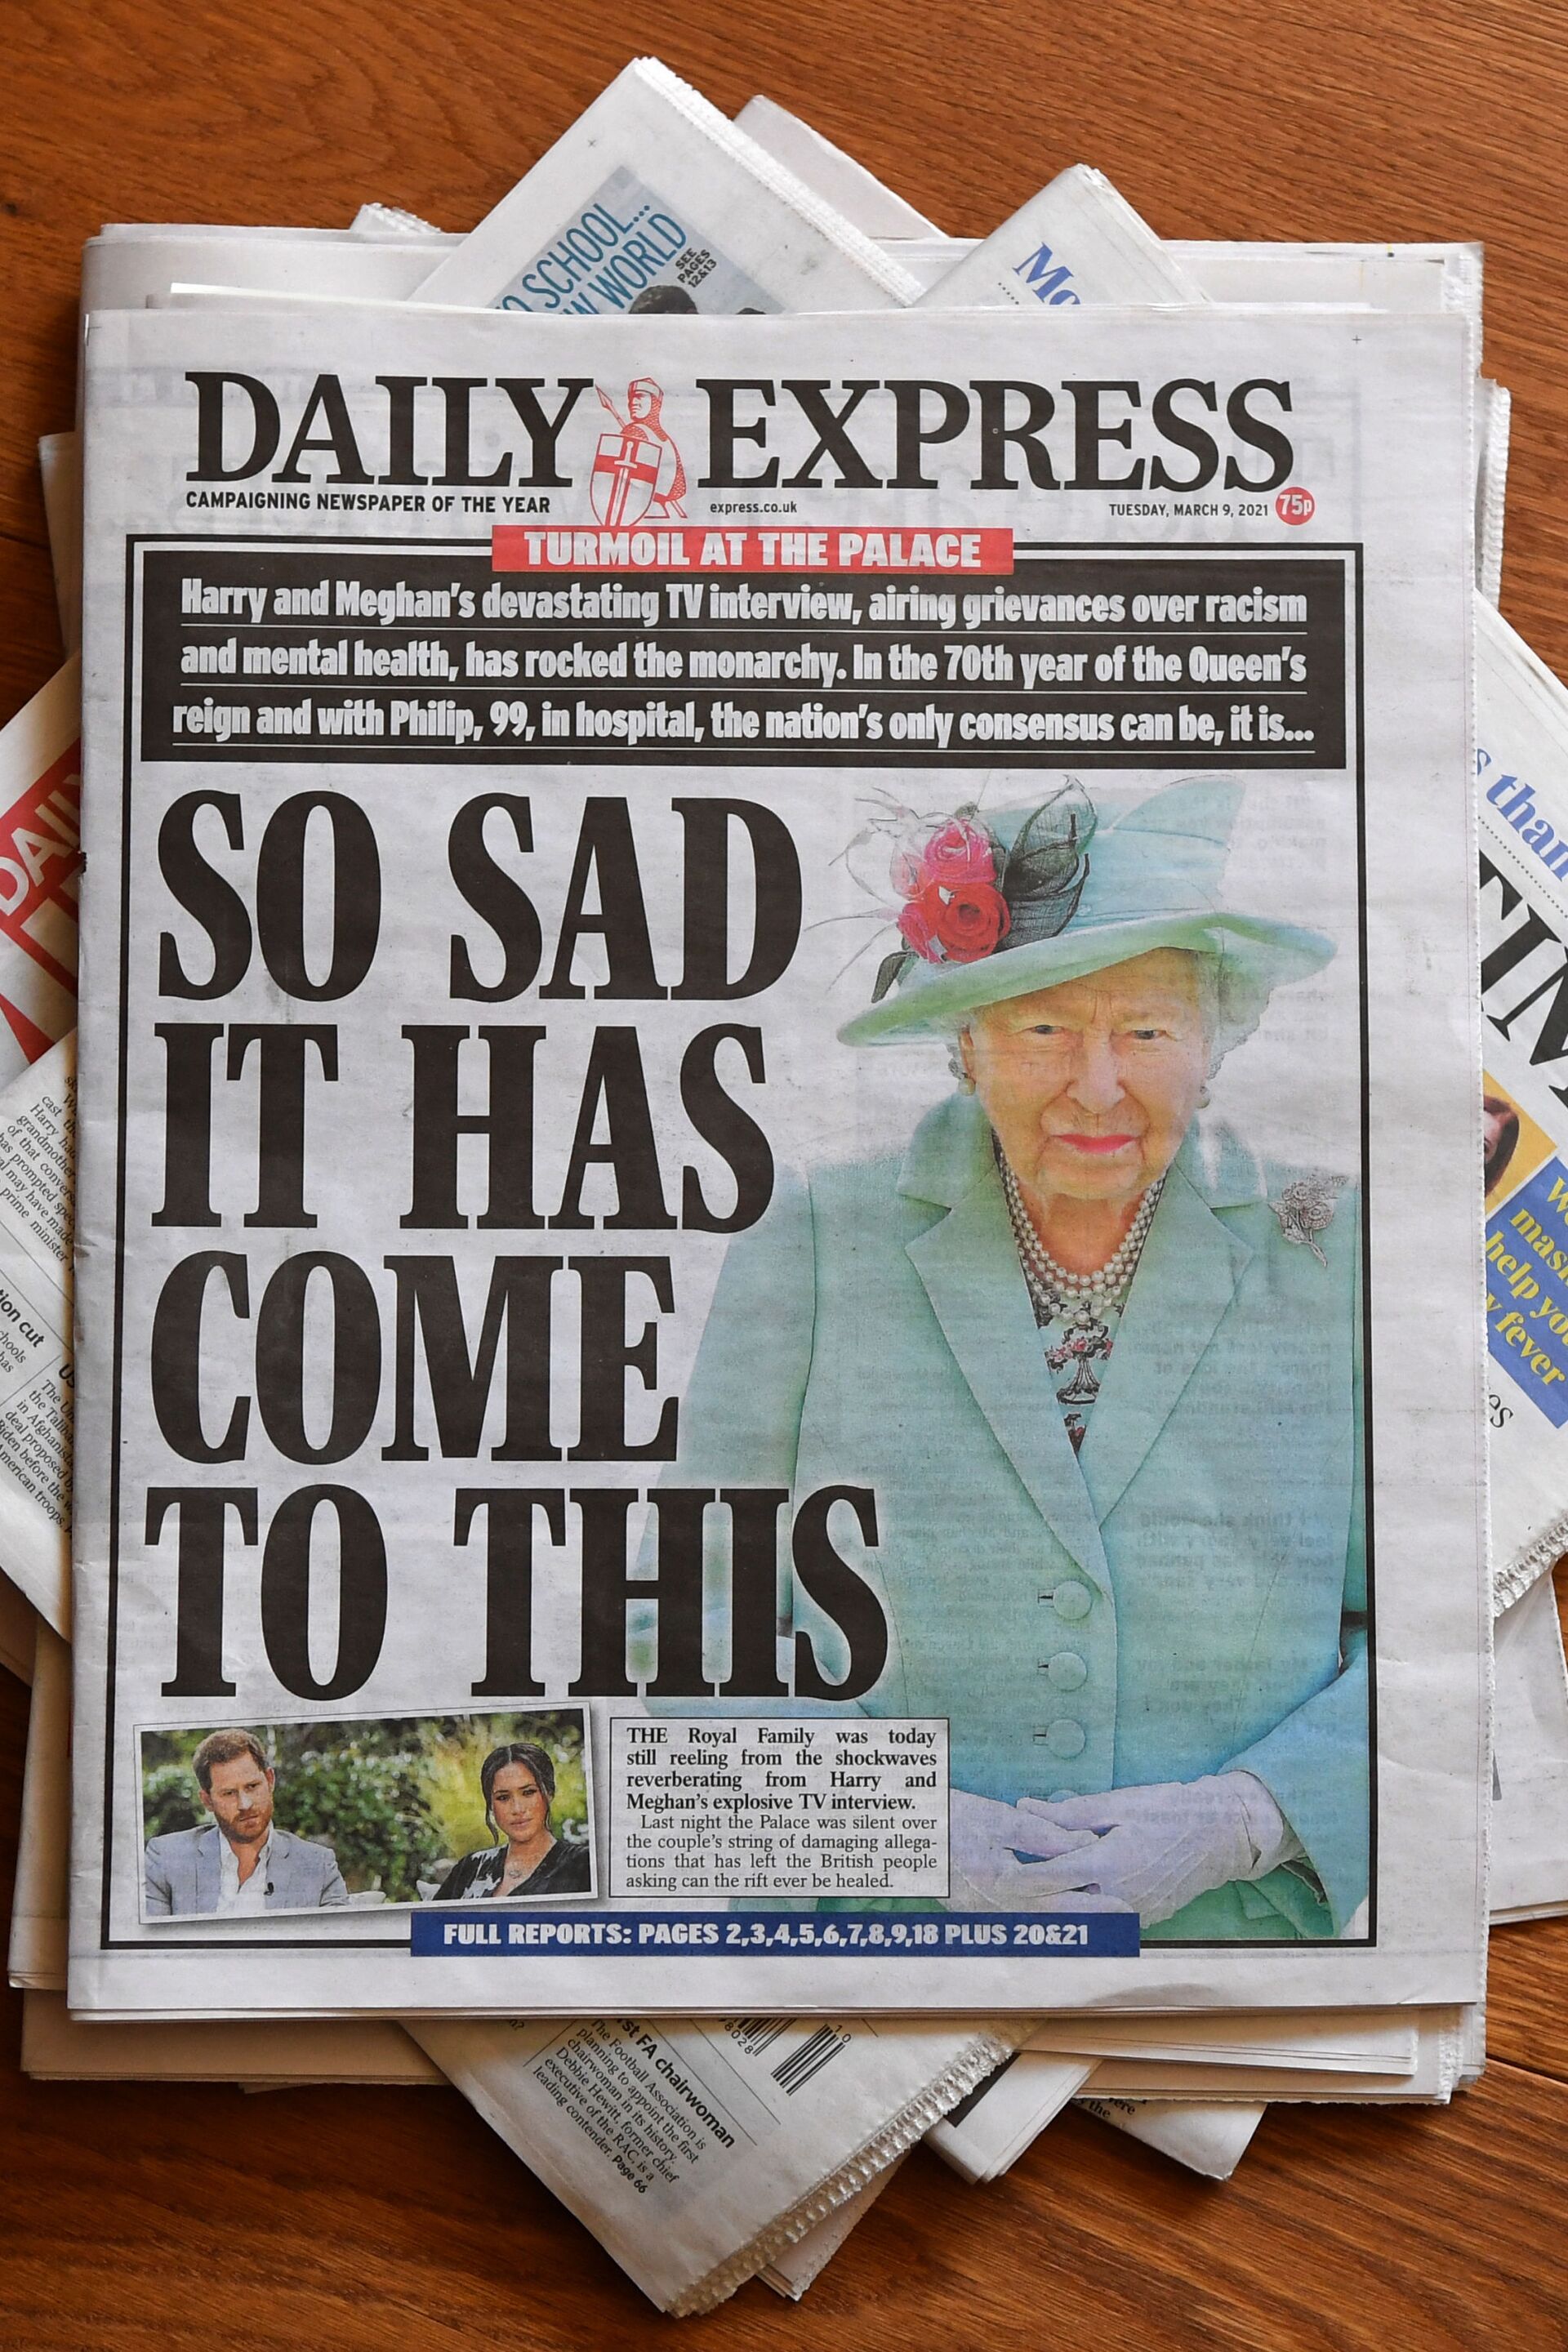 An arrangement of UK daily newspapers photographed as an illustration in Brenchley, Kent on March 9, 2021, shows front page headlines reporting on the story of the interview given by Meghan, Duchess of Sussex, wife of Britain's Prince Harry, Duke of Sussex, to Oprah Winfrey, which aired on UK broadcaster ITV. - Sputnik International, 1920, 07.09.2021